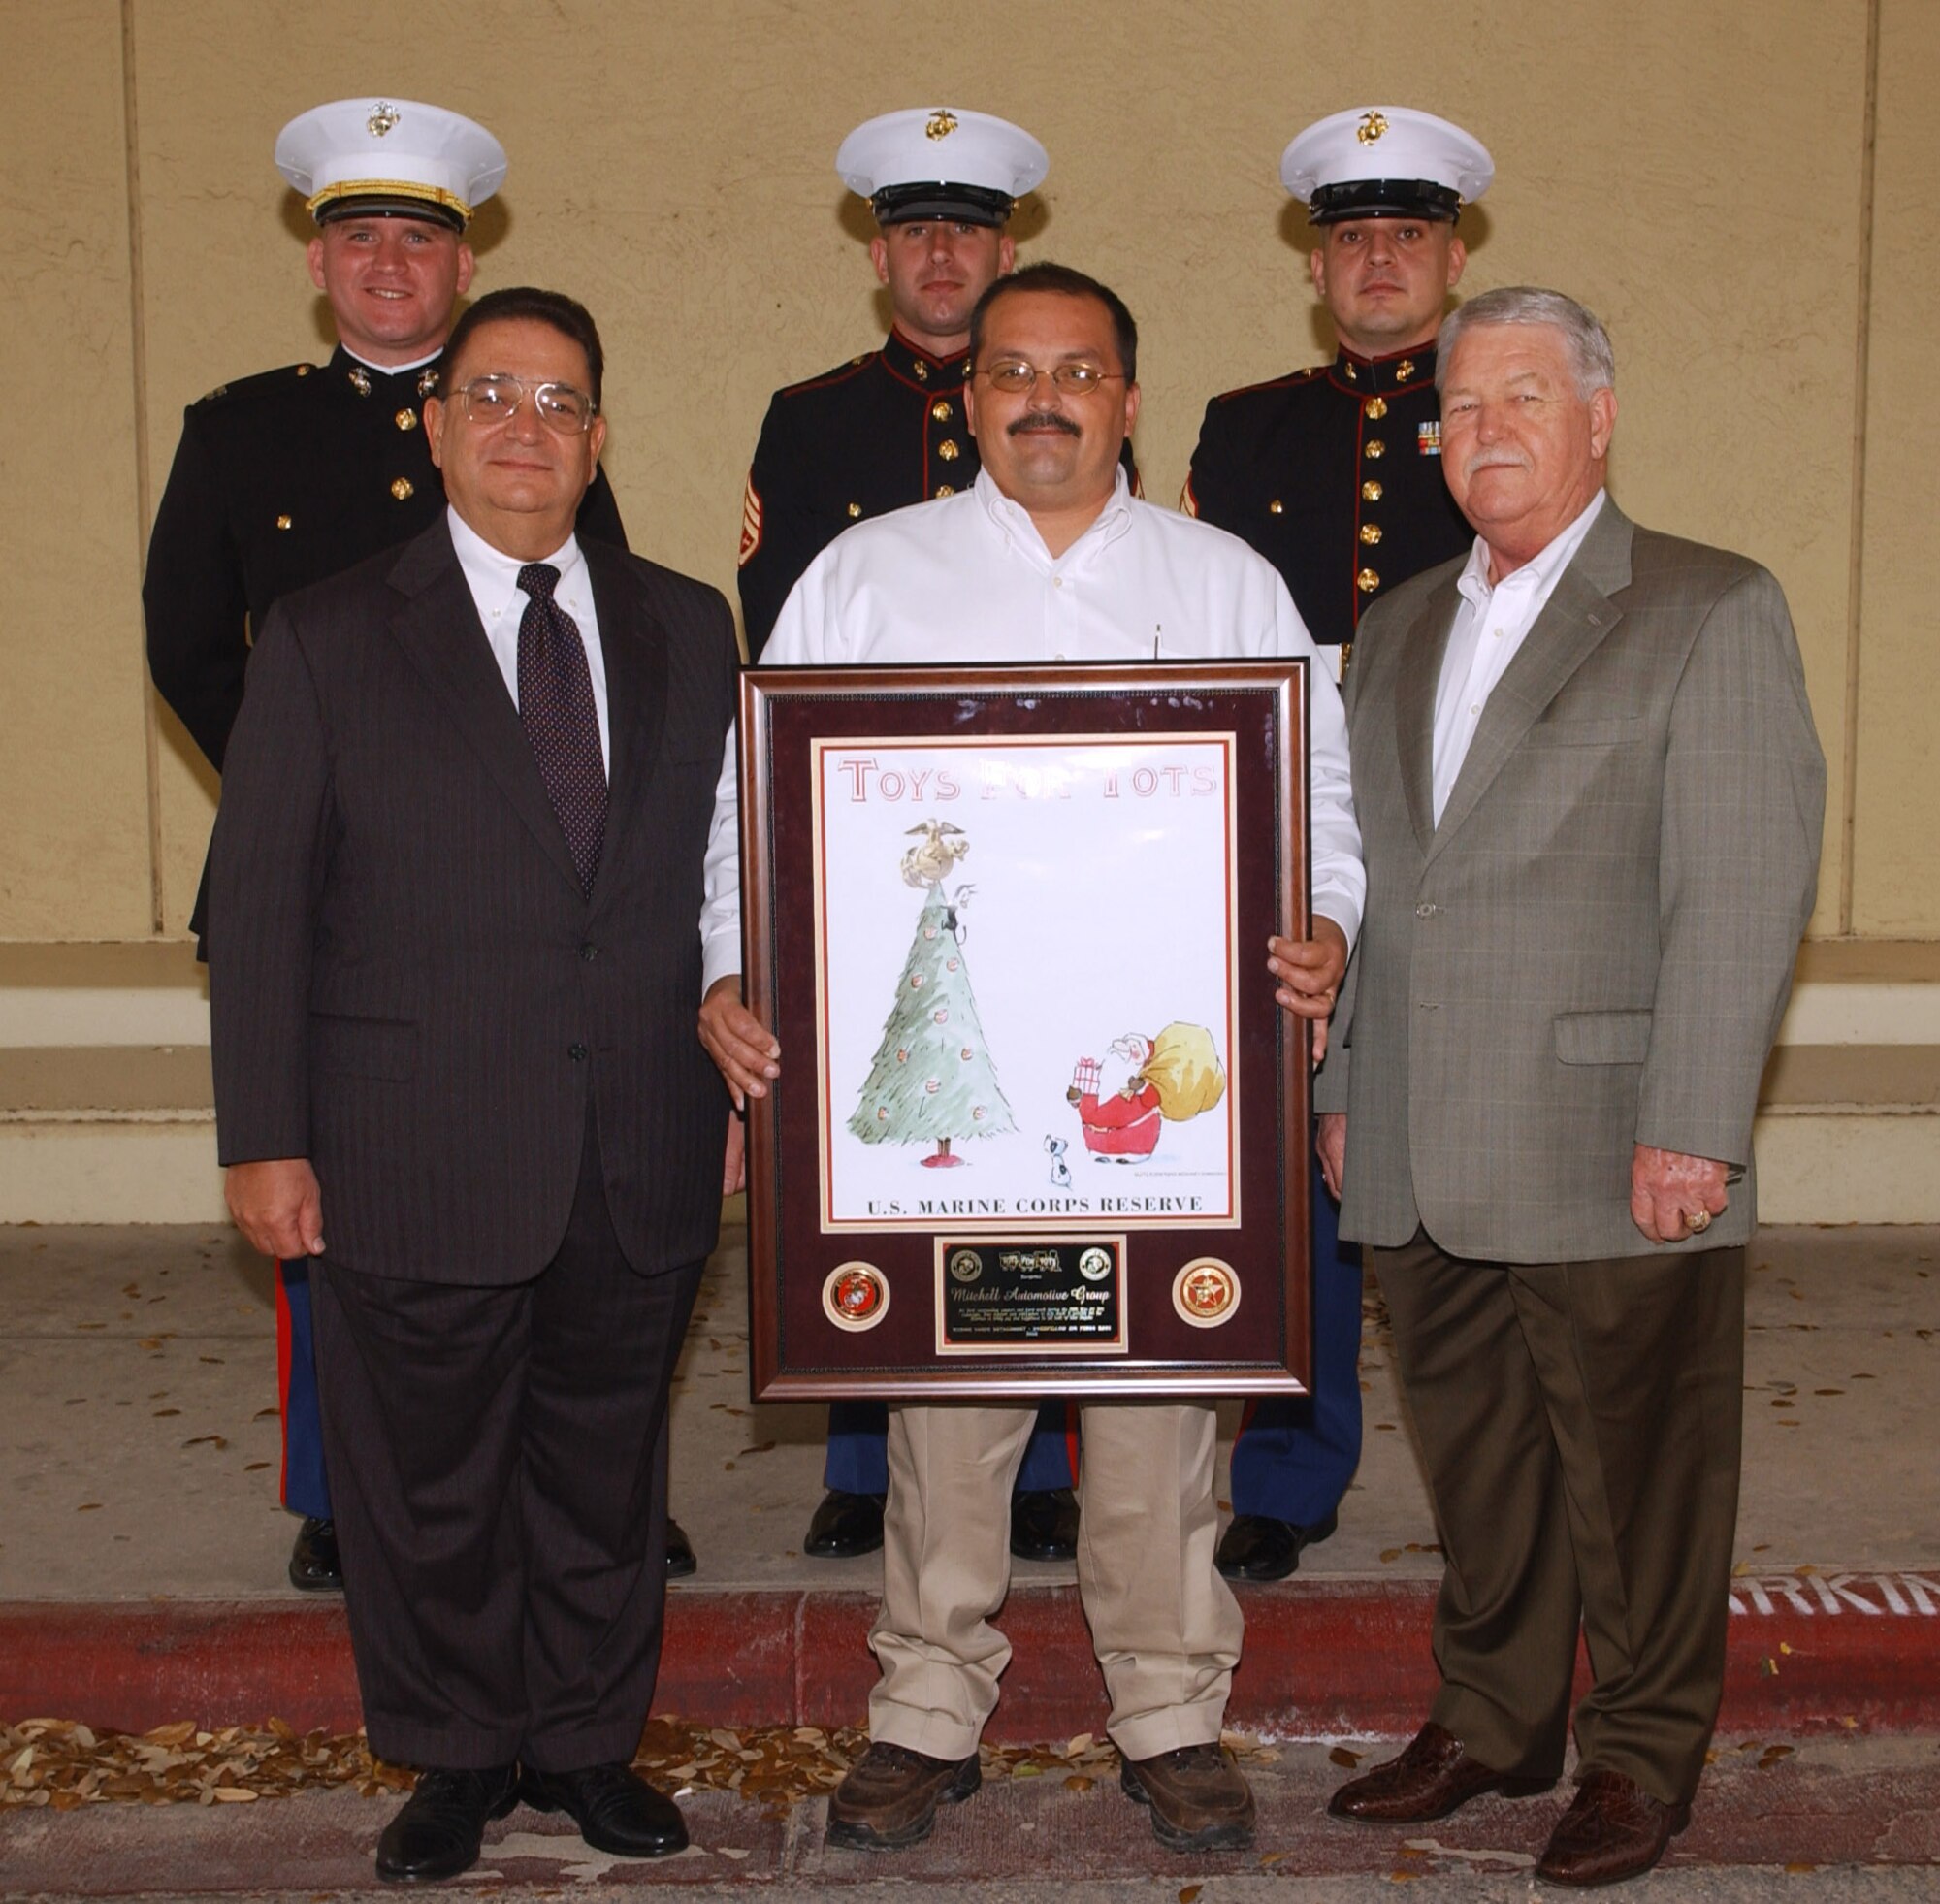 (Back row, from left to right): Marine Capt. Henry Billings, Marine Staff Sgt. John Juras and Gunnery Sgt. Jacob Eckes, all of the Marine Corps Detachment at Goodfellow, pose for a photo behind Honorary Chief Master Sgt. Mike Mitchell, Tony Palmer (recipient) and Terry Reynolds after a special presentation by the San Angelo City Council to Mr. Palmer in recognition of his eight years of service as the off-base coordinator for the Toys for Tots campaign, Tuesday during a city council meeting at the San Angelo Convention Center.

“Mr. Palmer’s unselfish dedication to the drive provides a service that is invaluable to Toys for Tots,” said Master Gunnery Sgt. Chauncey Lovely, also of the Marine Corps Detachment. “Not only does he bring smiles to the faces of kids, he brings a great deal of pleasure to the Marine Corps Detachment and our staff. He is surely a great humanitarian,” Sgt. Lovely continued. (U.S. Air Force photo by Airman 1st Class Kamaile Chan).